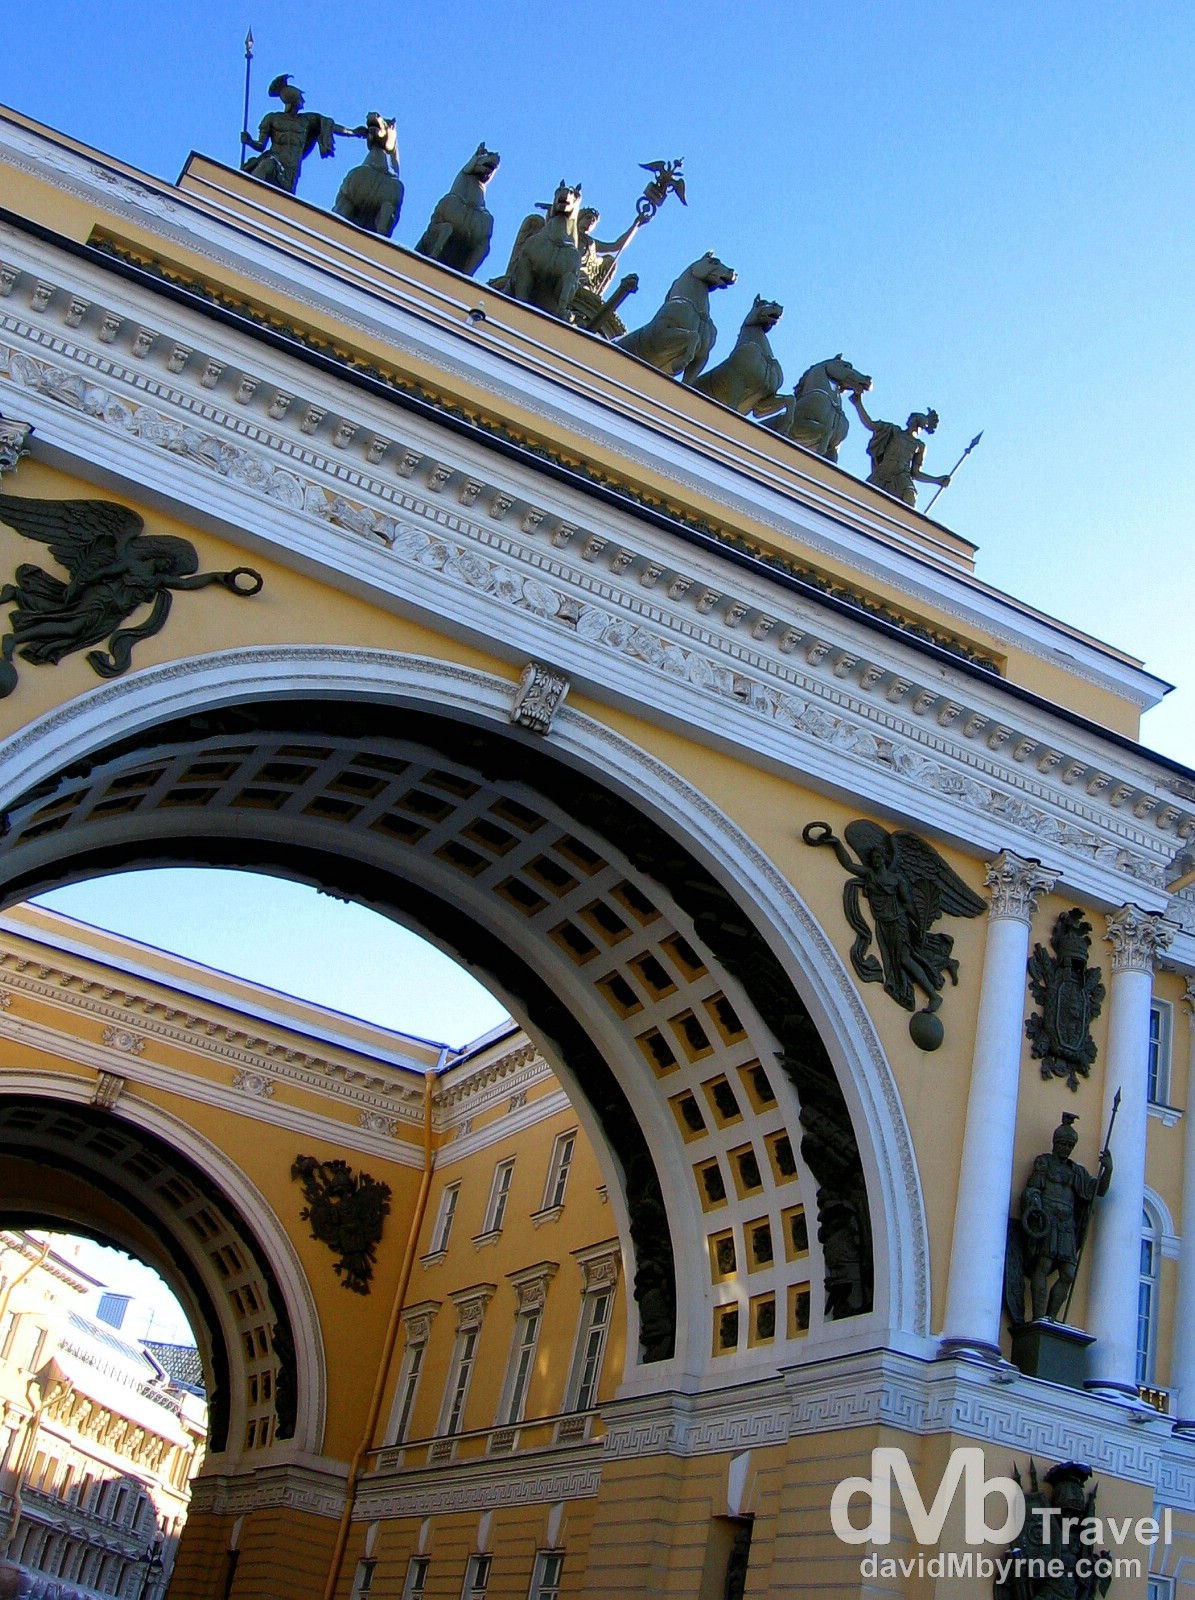 The Double Triumphal Arch of the General Staff Building off Palace Square in St. Petersburg, Russia. February 27, 2006.